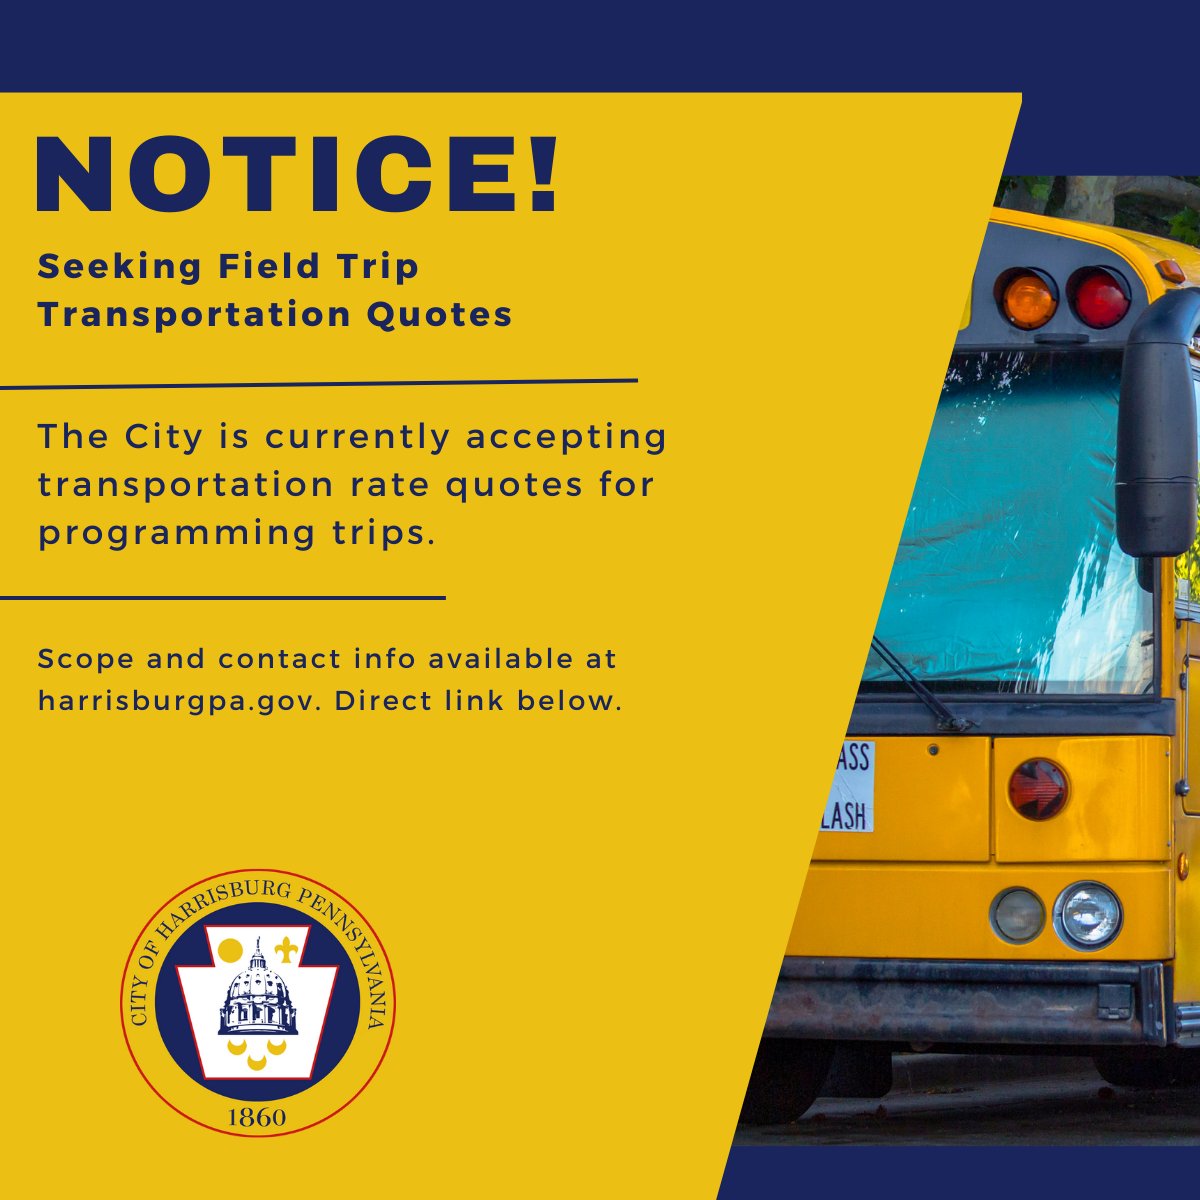 The City is currently seeking Field Trip Transportation quotes. More details can be found at harrisburgpa.gov/purchasing